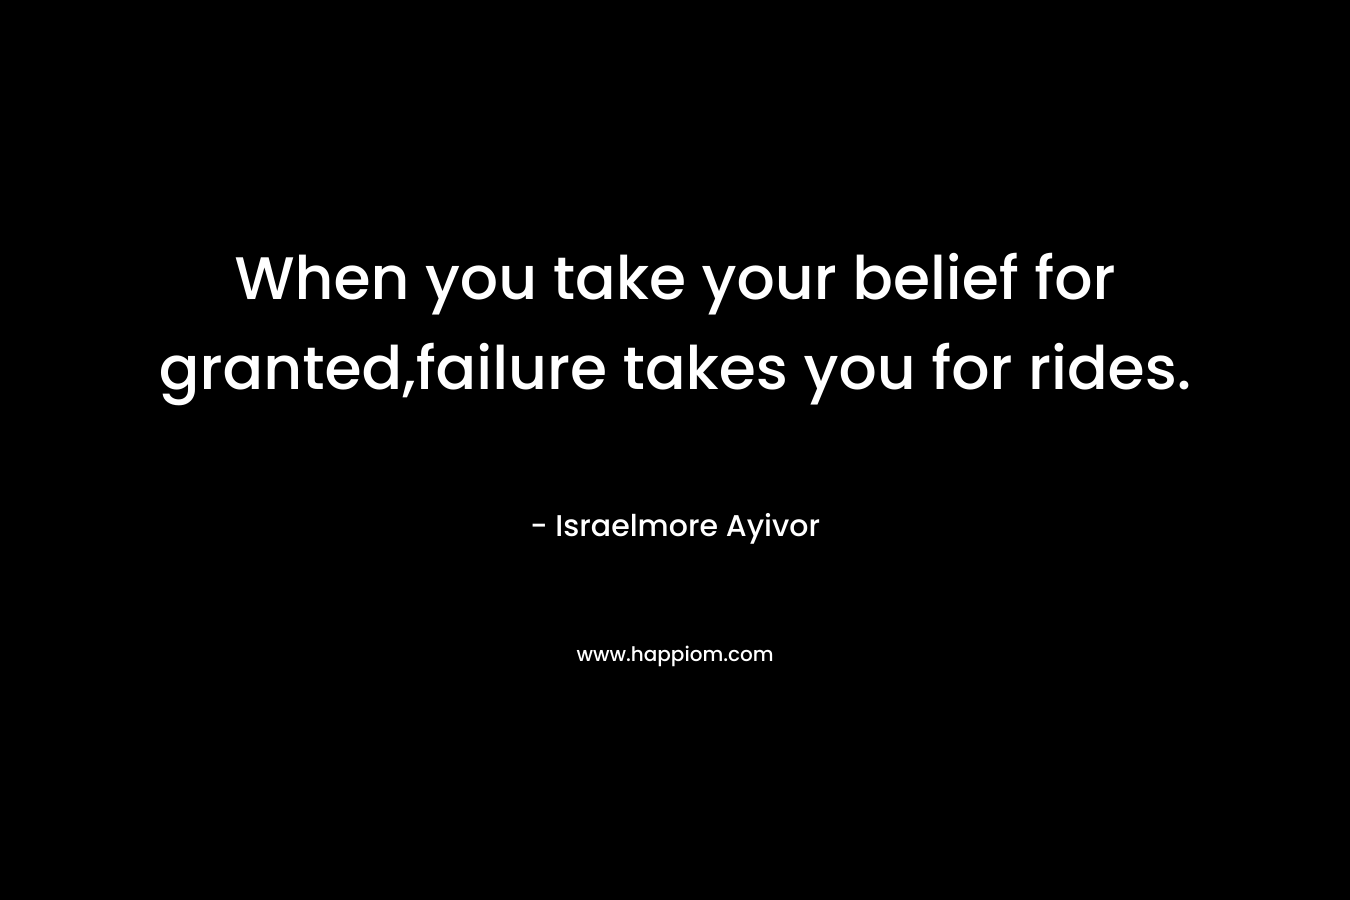 When you take your belief for granted,failure takes you for rides.